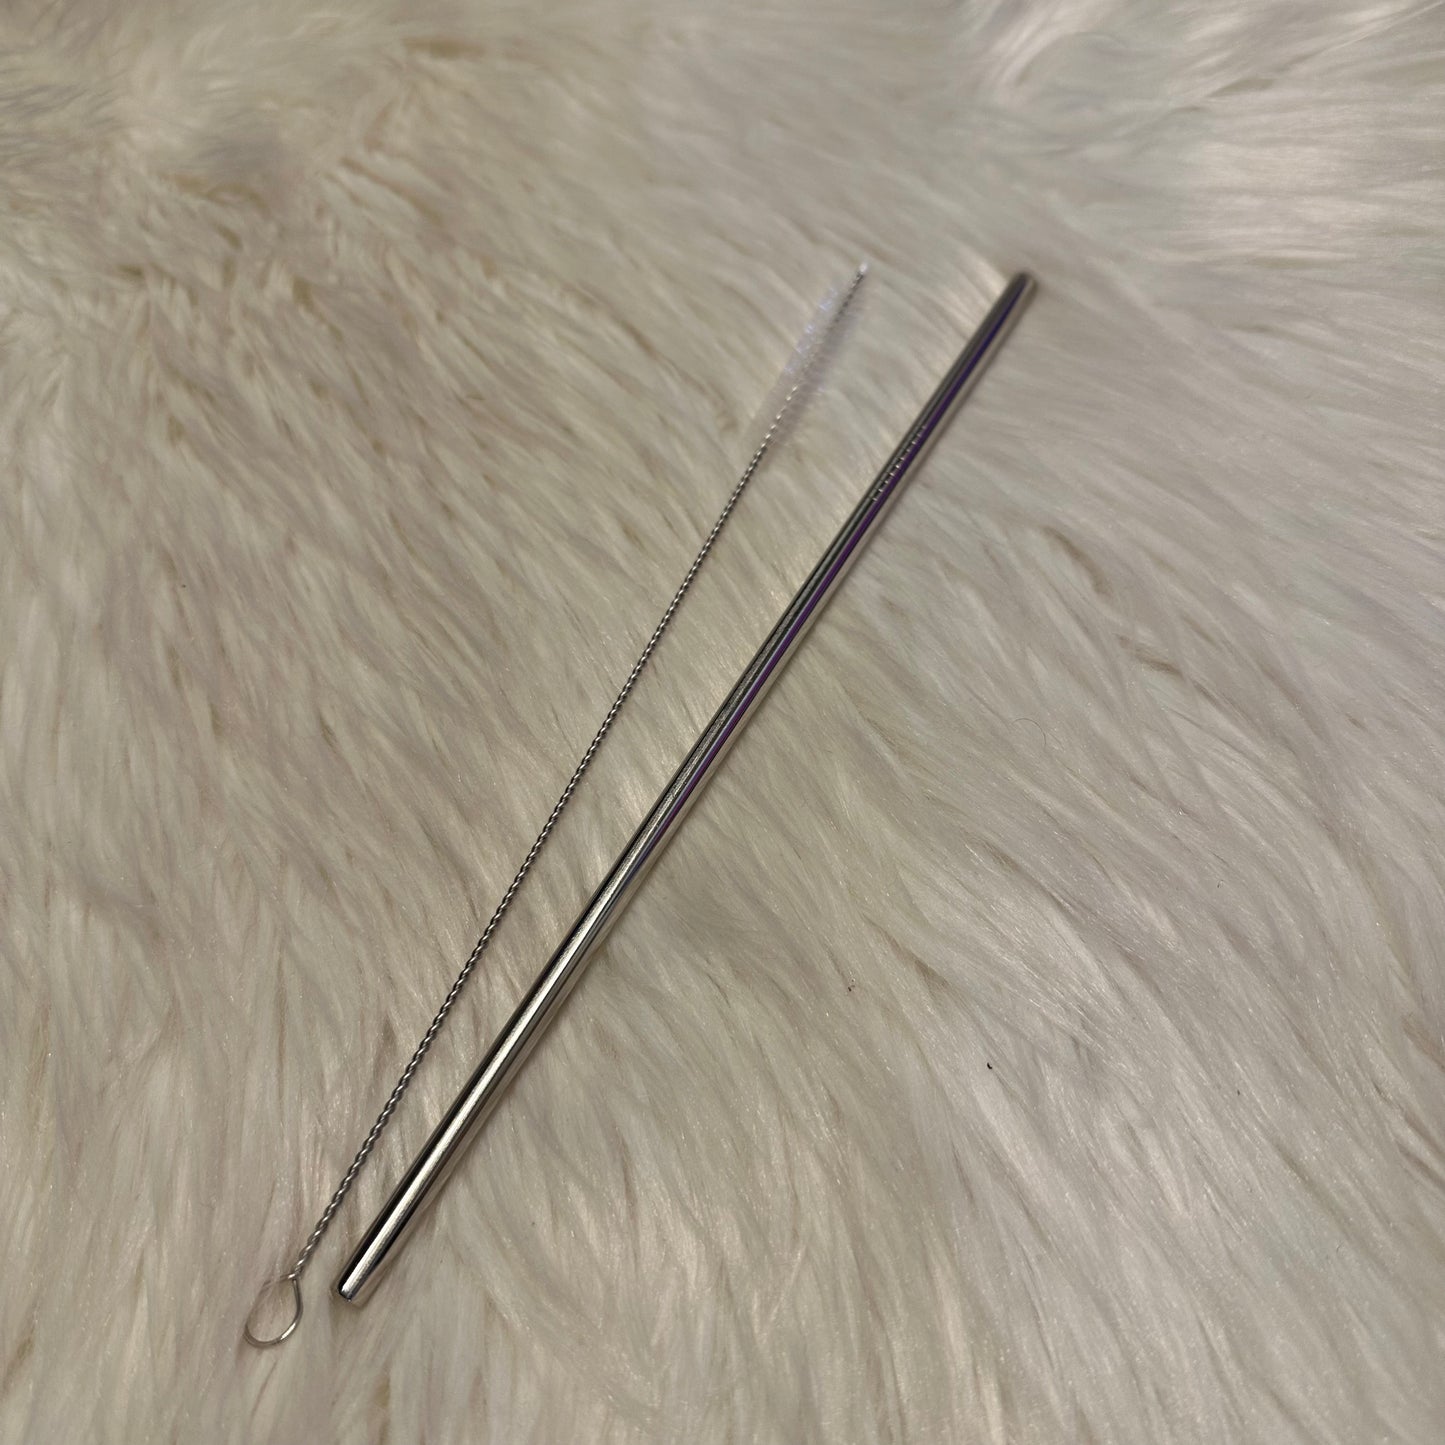 10.5” Metal Straws with Straw Cleaner